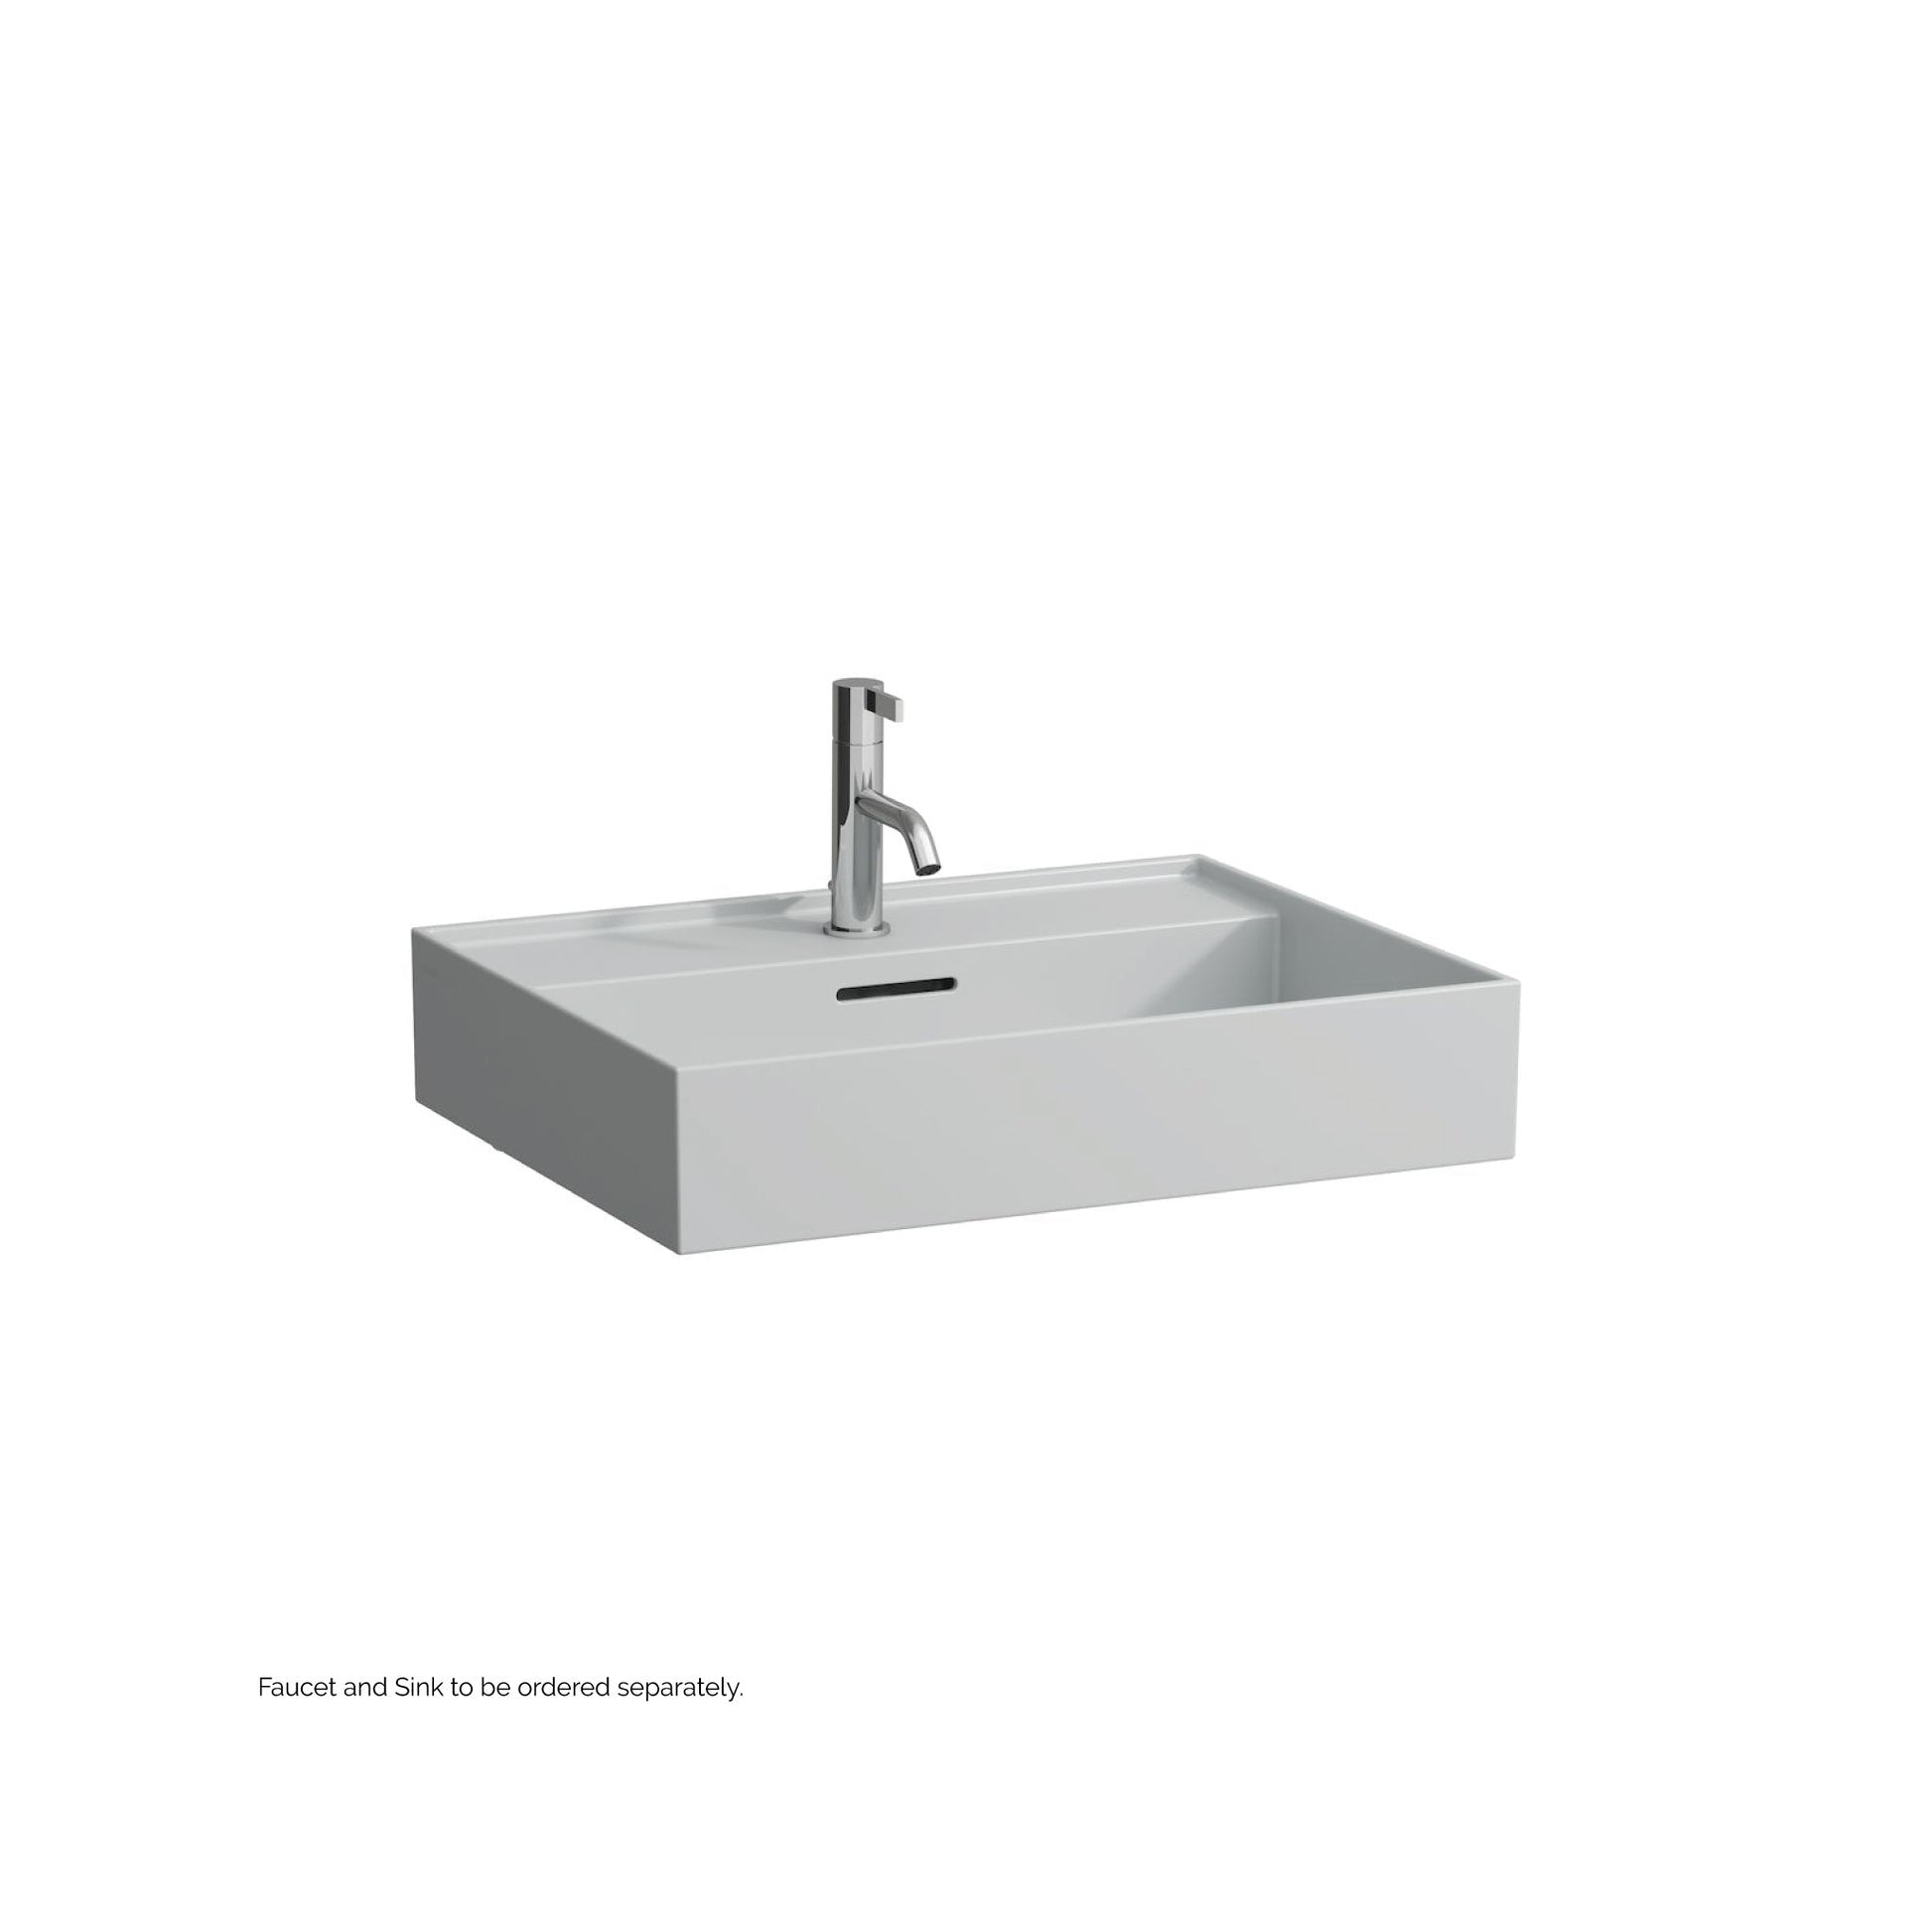 Laufen Kartell 24" x 18" Matte Gray Wall-Mounted Bathroom Sink With Faucet Hole